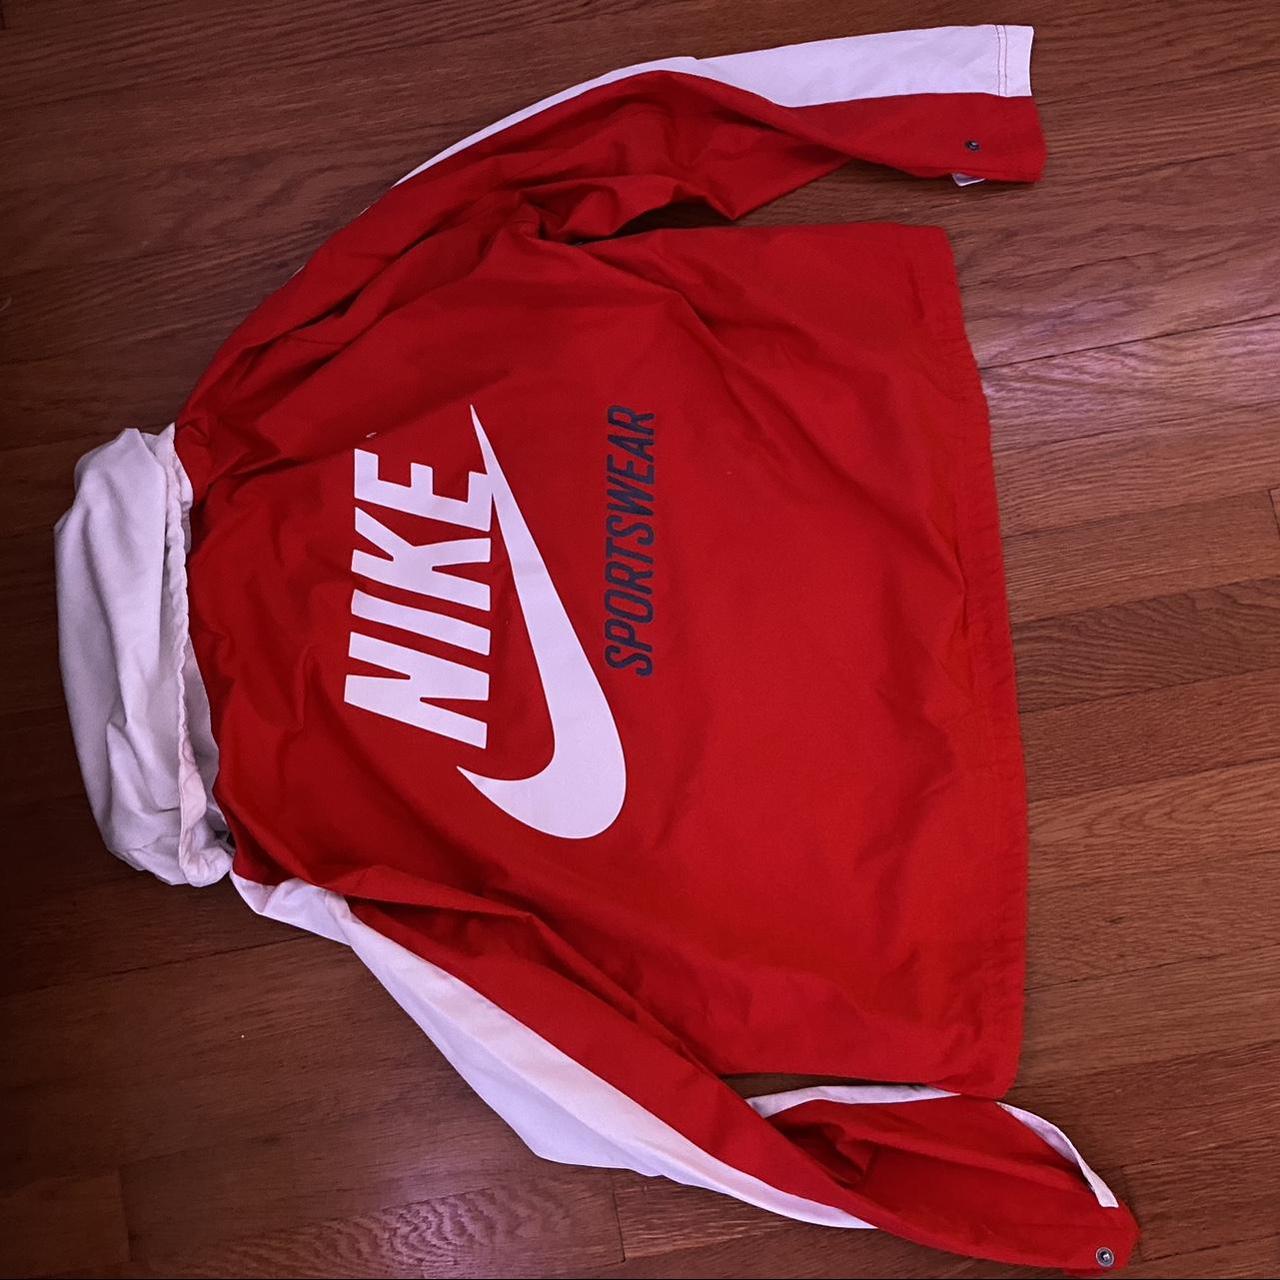 Nike Men's Red and White Jacket | Depop